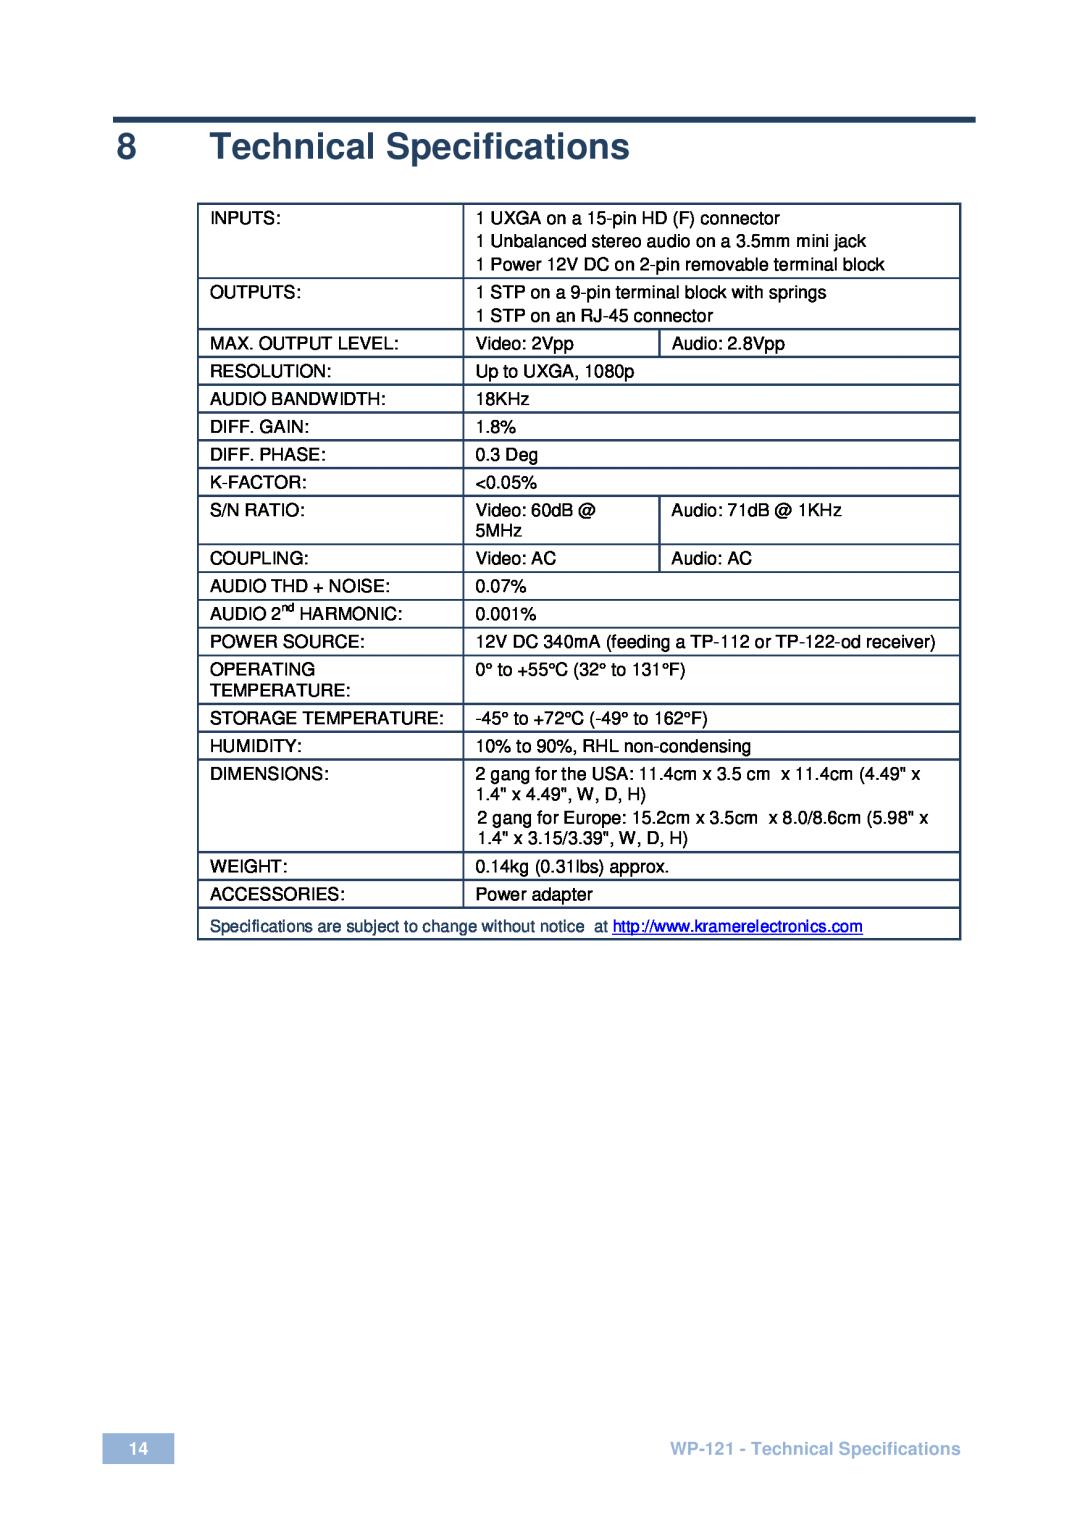 Kramer Electronics user manual WP-121- Technical Specifications 